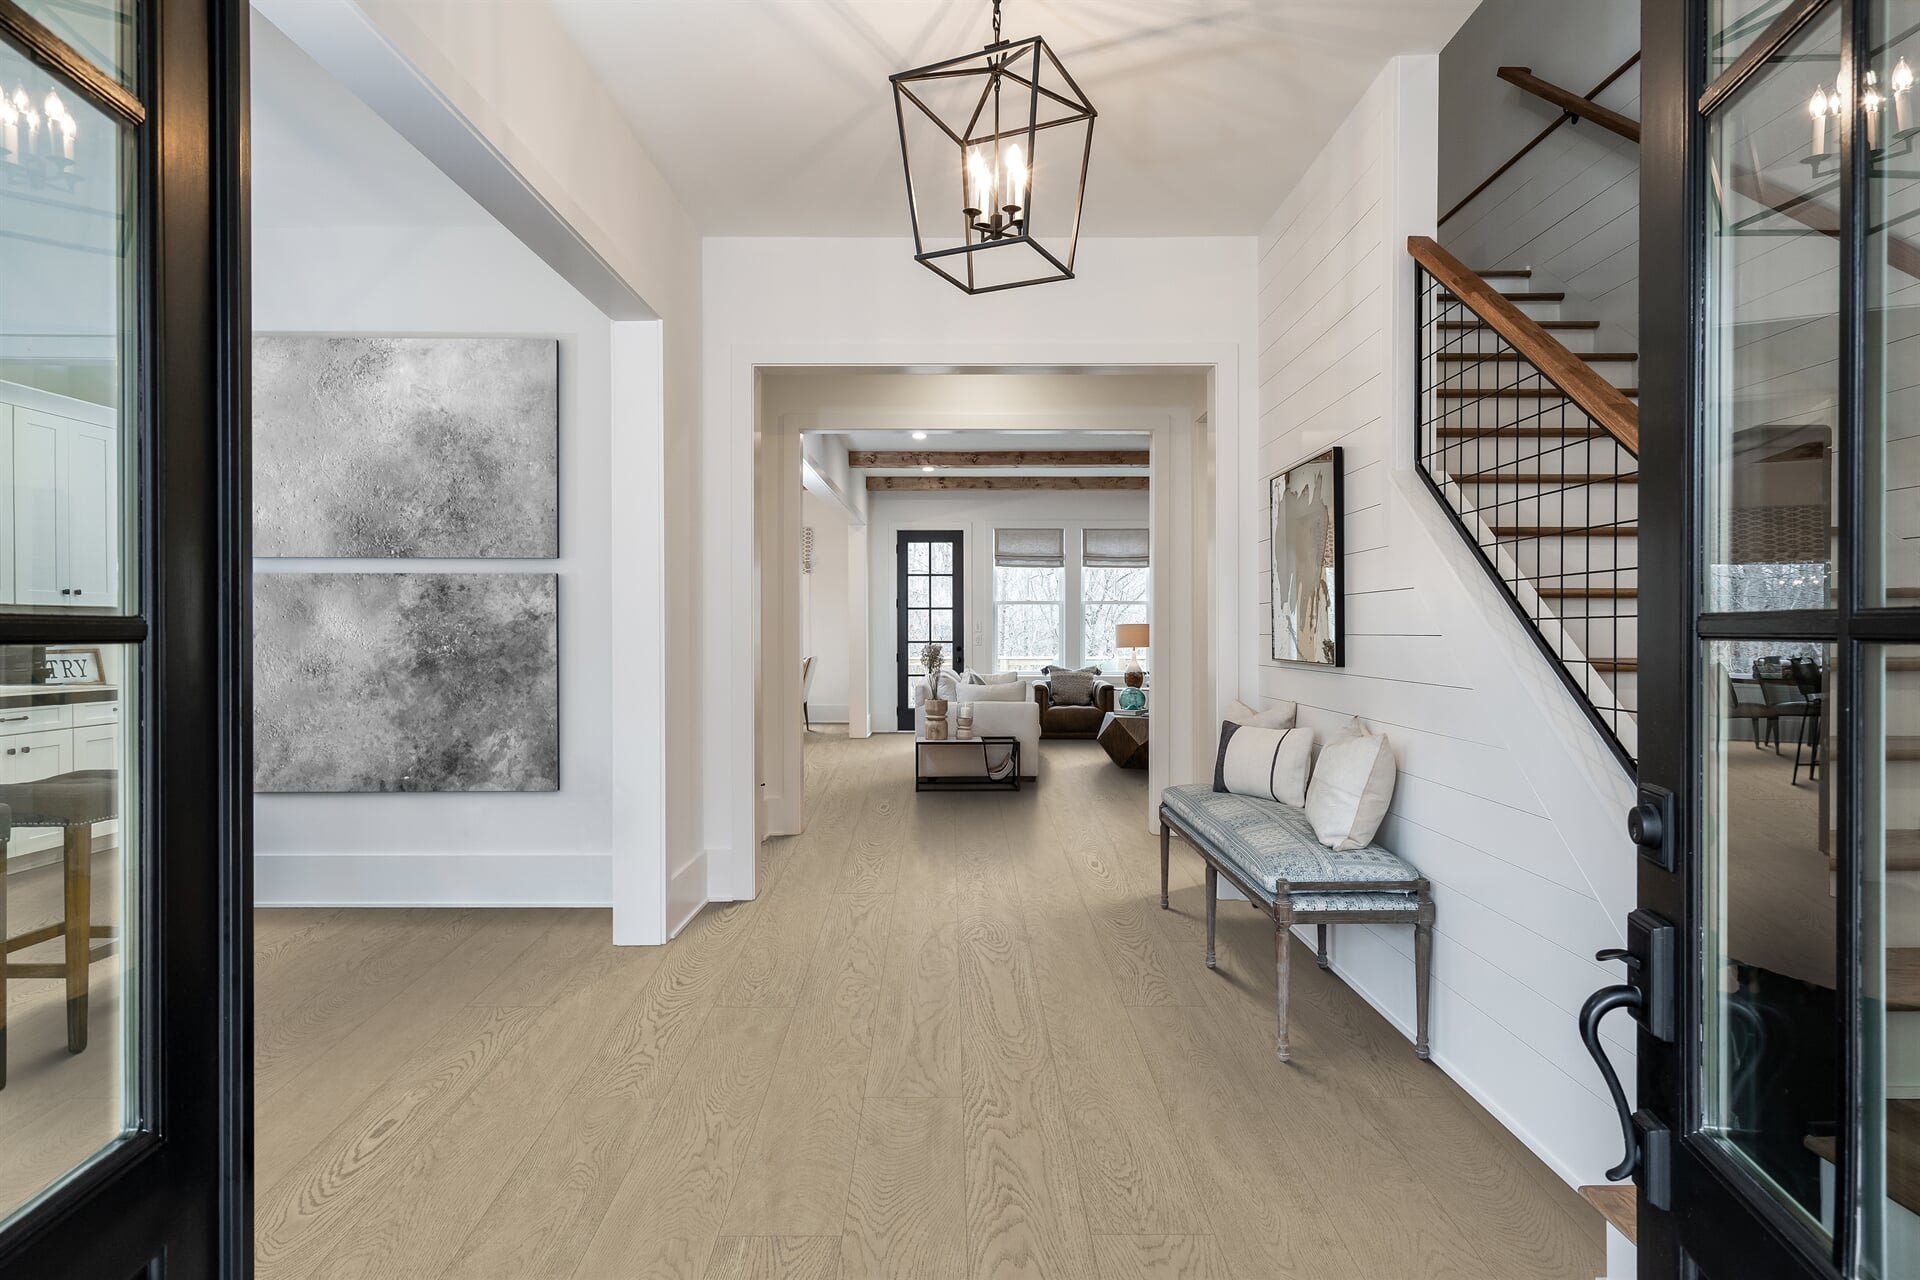 Flooring Installation at home: the best materials